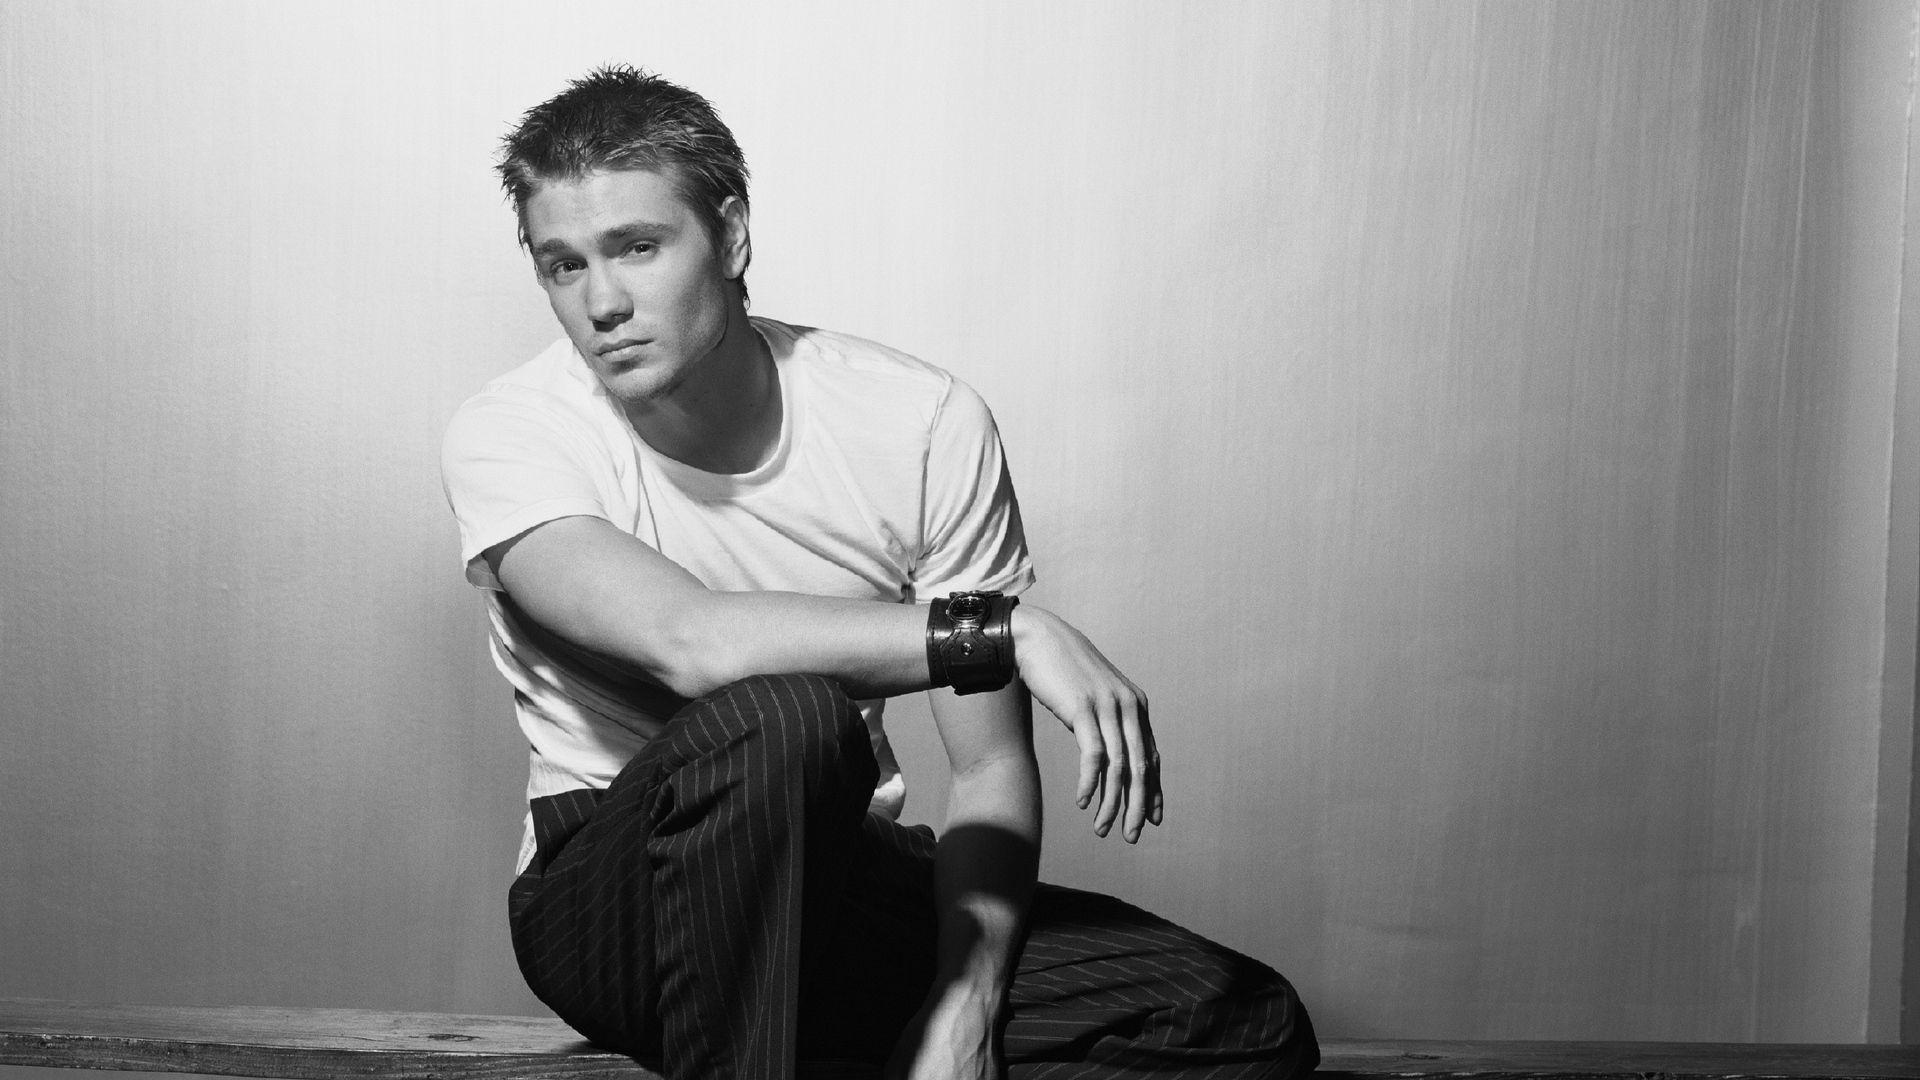 Download wallpaper 1920x1080 chad michael murray, actor, guy, ladder